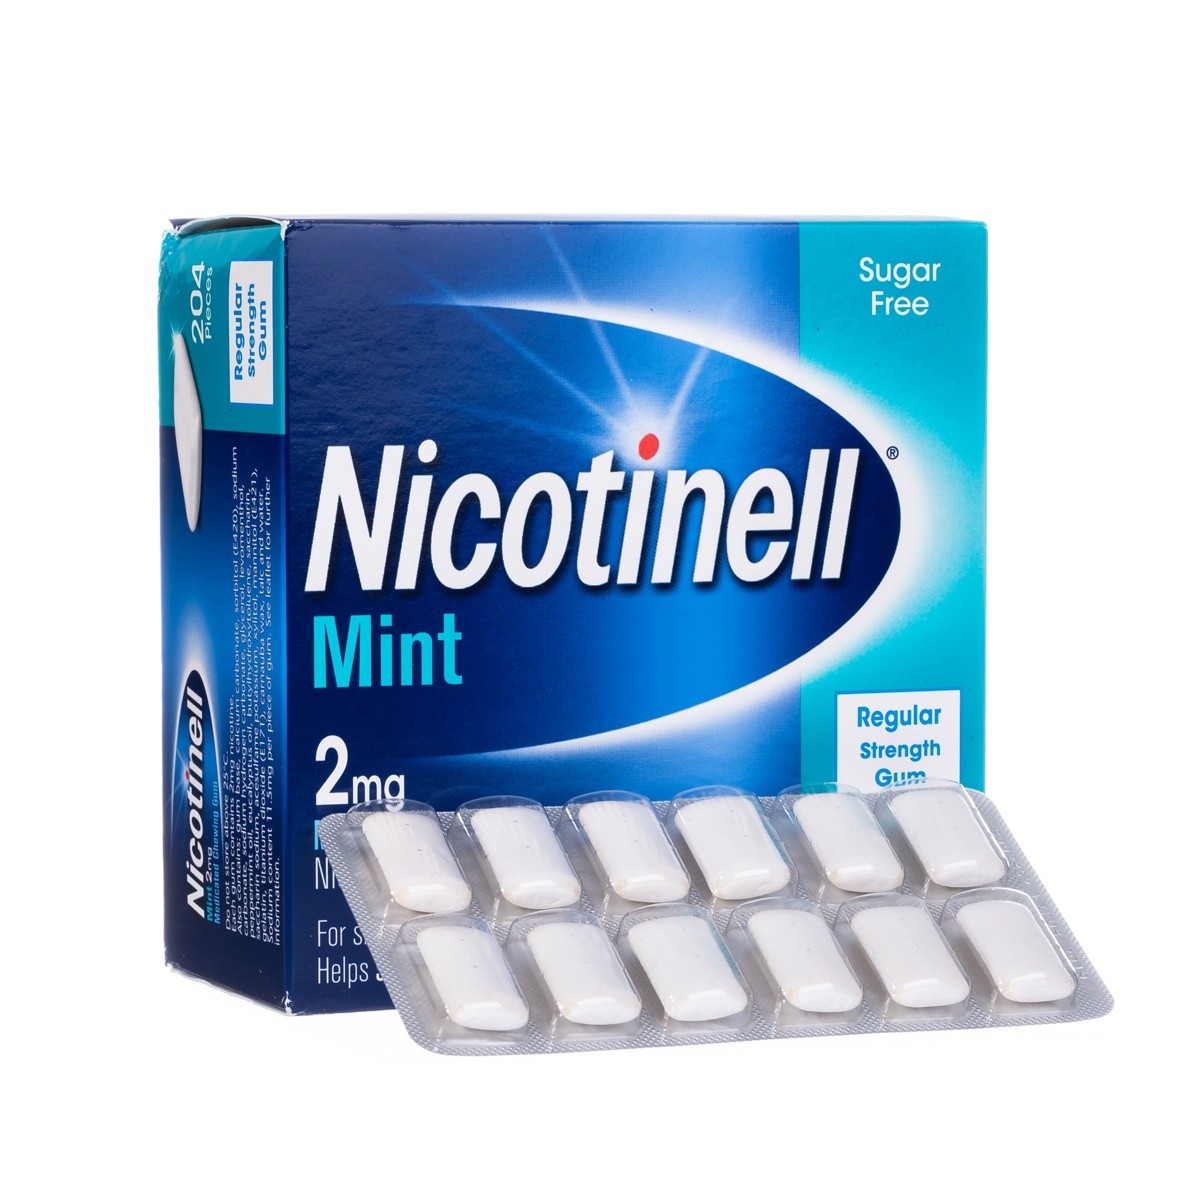 nicotinell